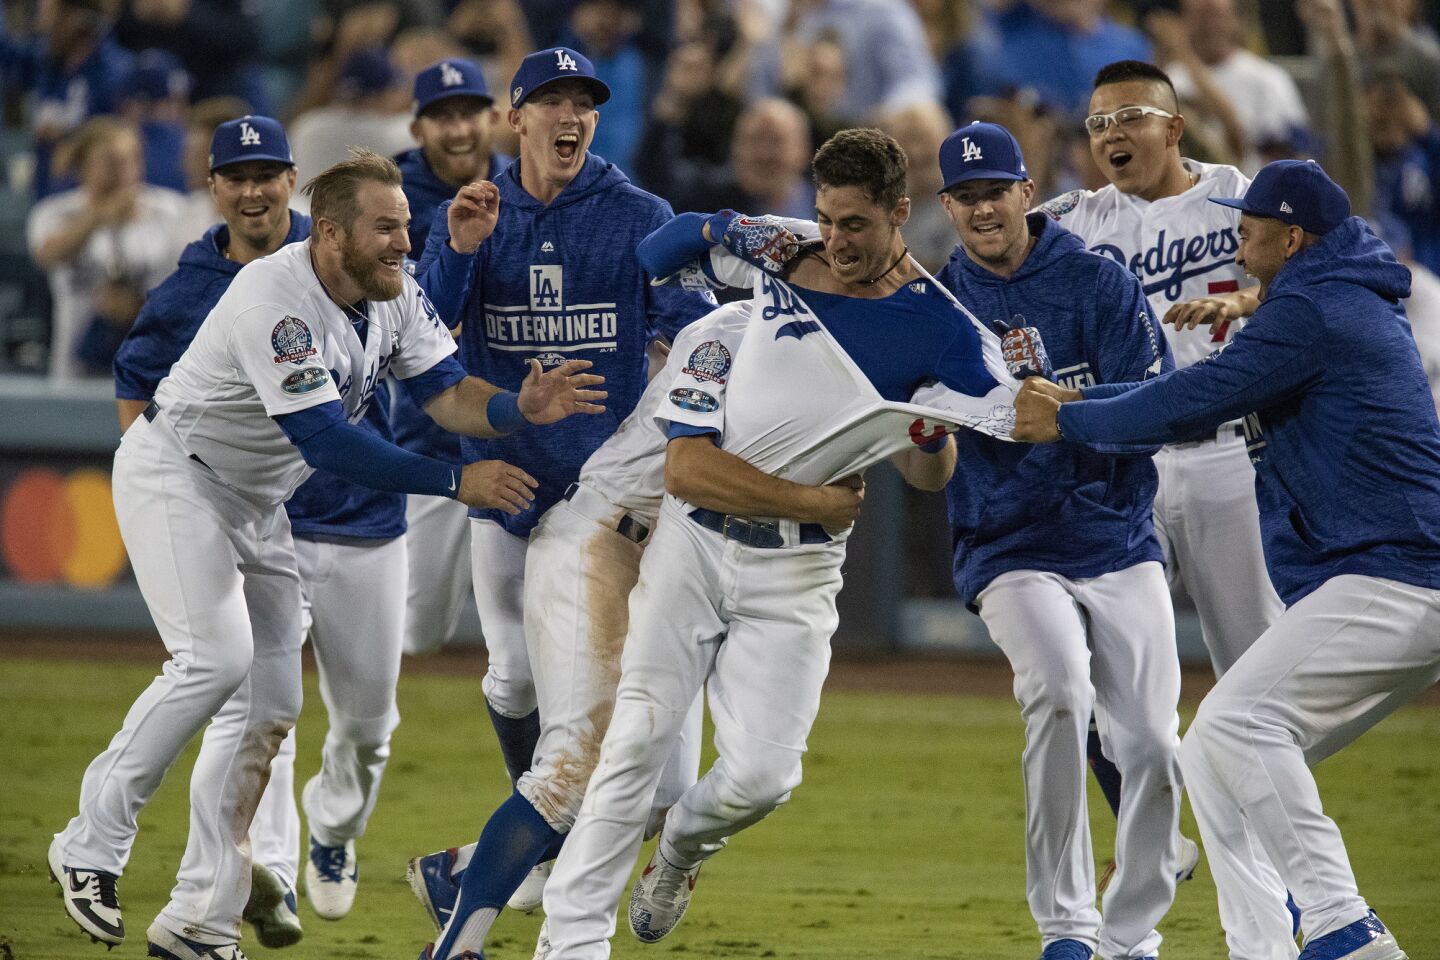 Teammates mob Dodgers center fielder Cody Bellinger after he hit the game winning RBI in the 13th inning during Game 4 of the NLCS at Dodger Stadium on October 16, 2018.